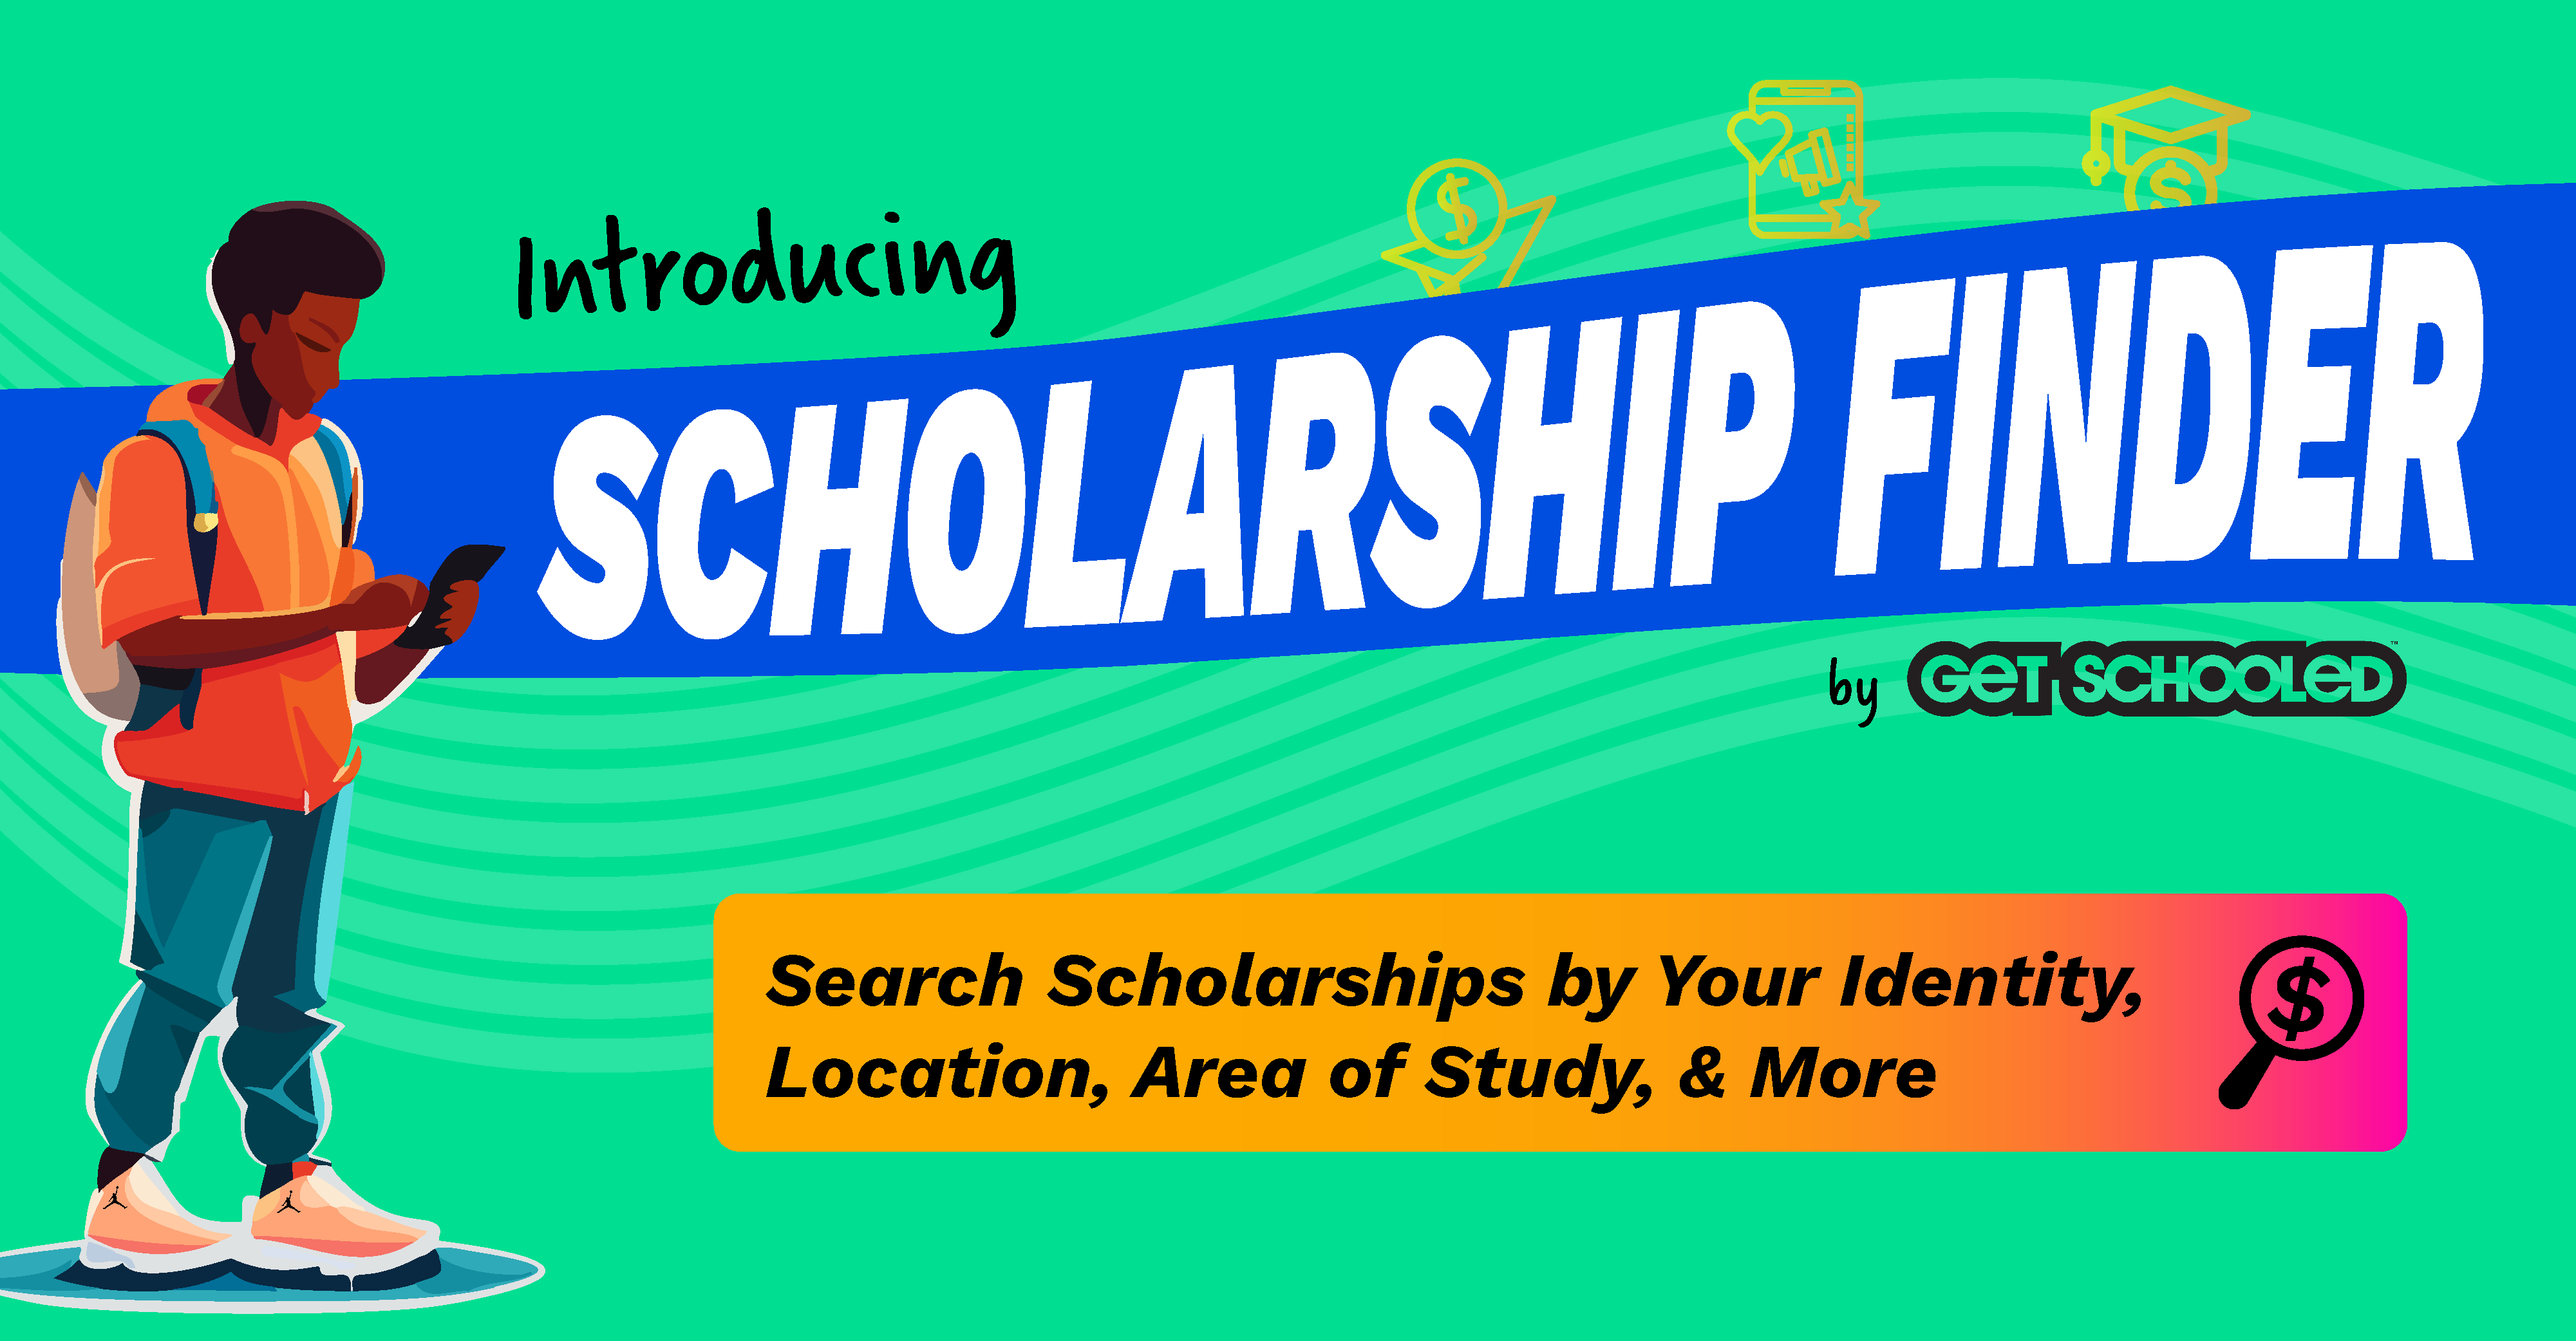 Illustration of a student (cartoon vector) with a backpack, gazing at their phone. The banner promotes the Get Schooled scholarship finder, stating, "Explore the Scholarship Finder by GET SCHOOLED: Discover Opportunities Based on Your Identity, Location, Area of Study, & More." - LGBTQ+ Scholarships for College